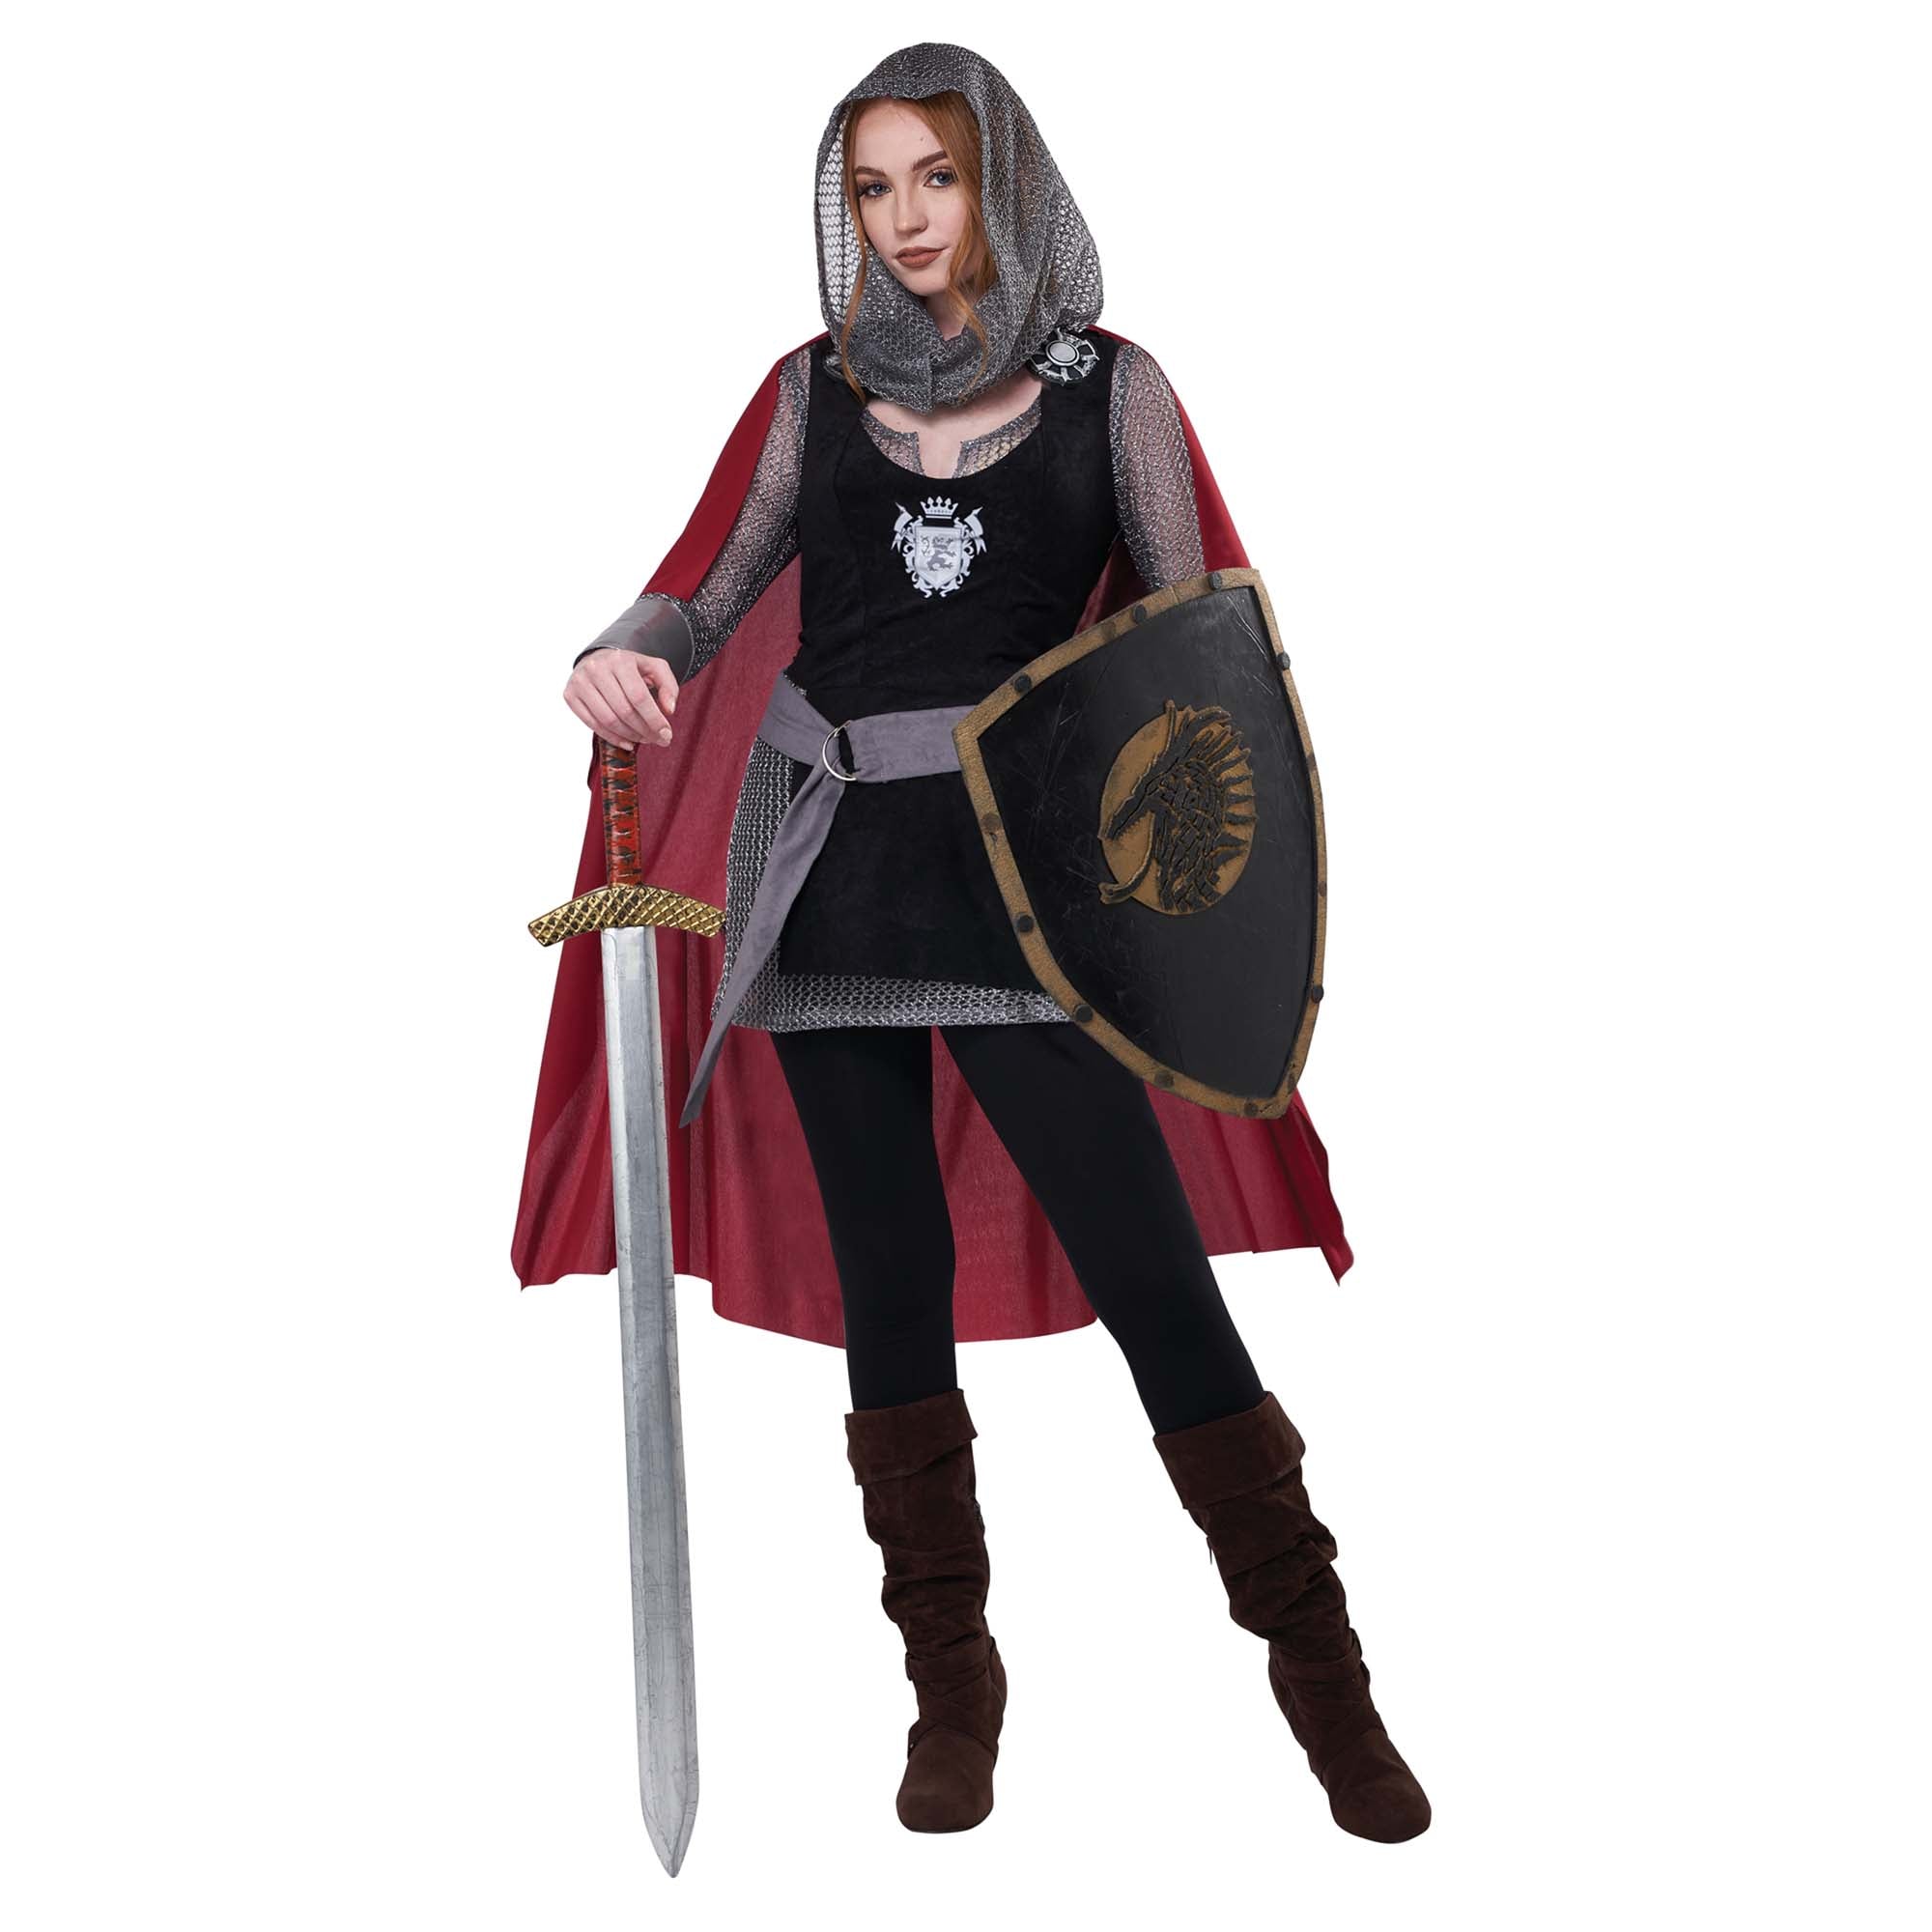 http://www.party-expert.com/cdn/shop/files/california-costumes-costumes-medieval-lady-knight-costume-for-adults-chainmail-dress-33313319747770.jpg?v=1688498962&width=2000